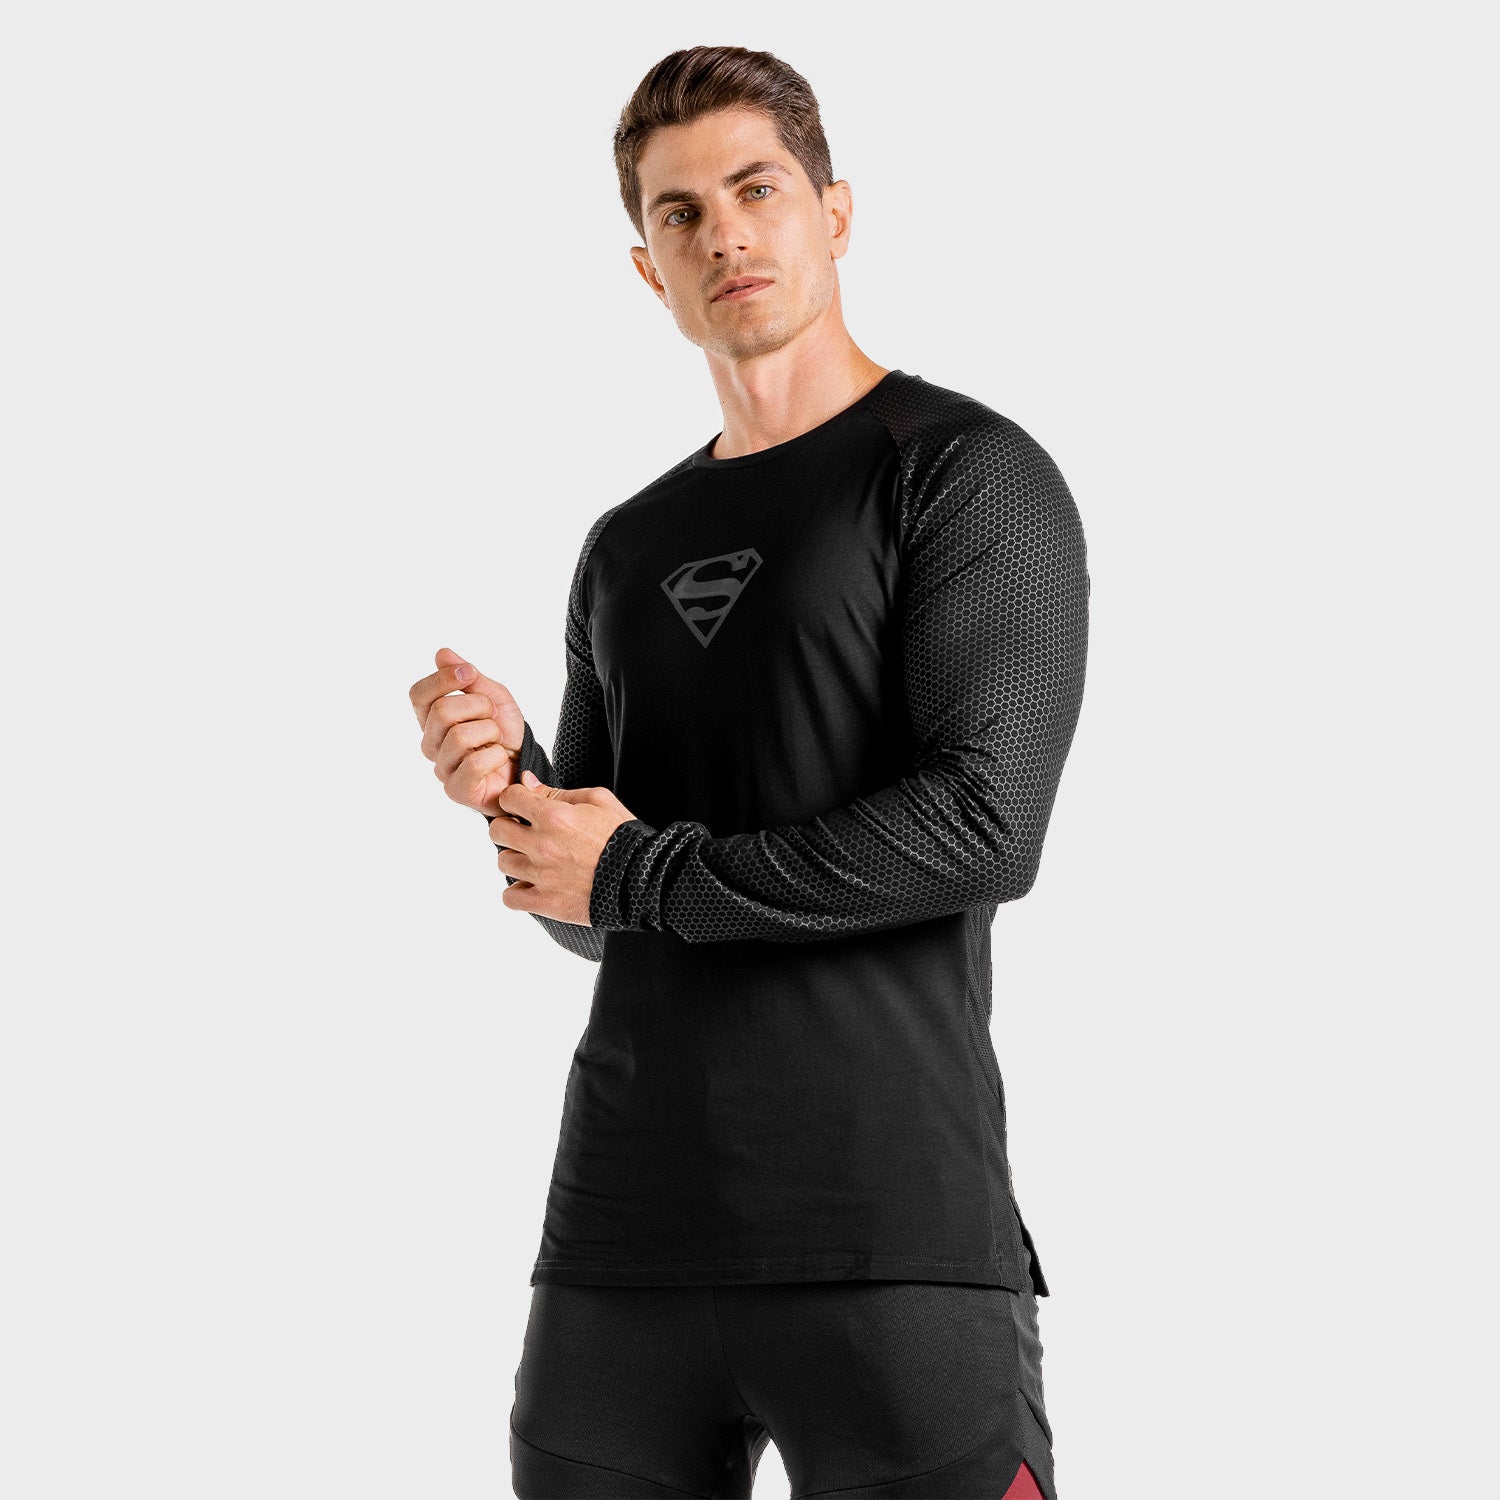 squatwolf-workout-shirts-for-men-superman-gym-long-sleeves-tee-black-gym-wear